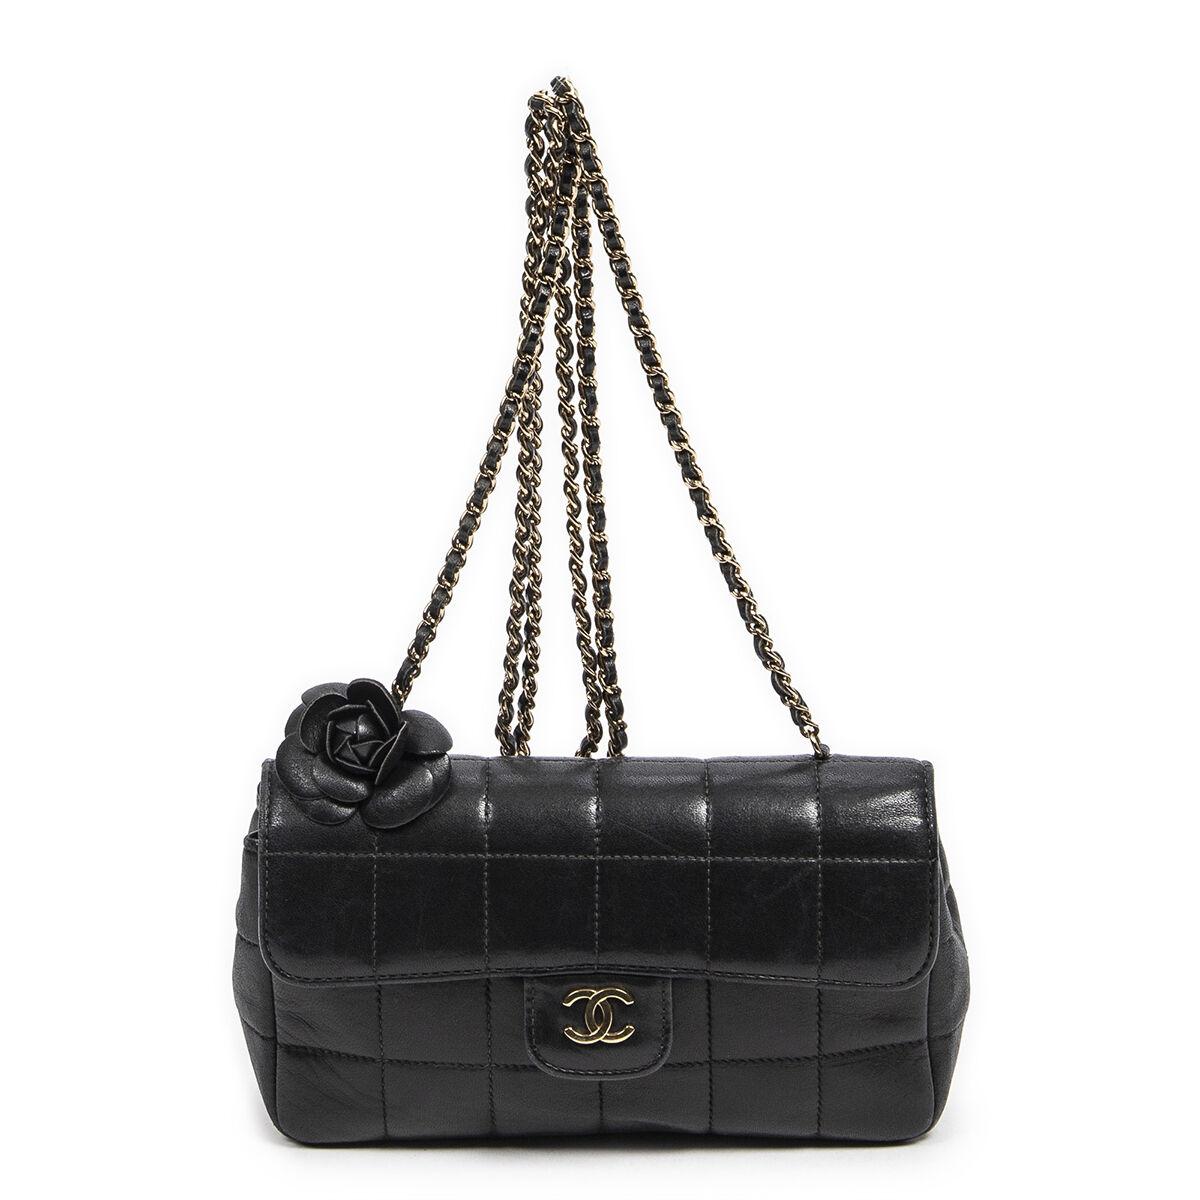 Lot - New CHANEL Camellia Limited Edition Crossbody Bag